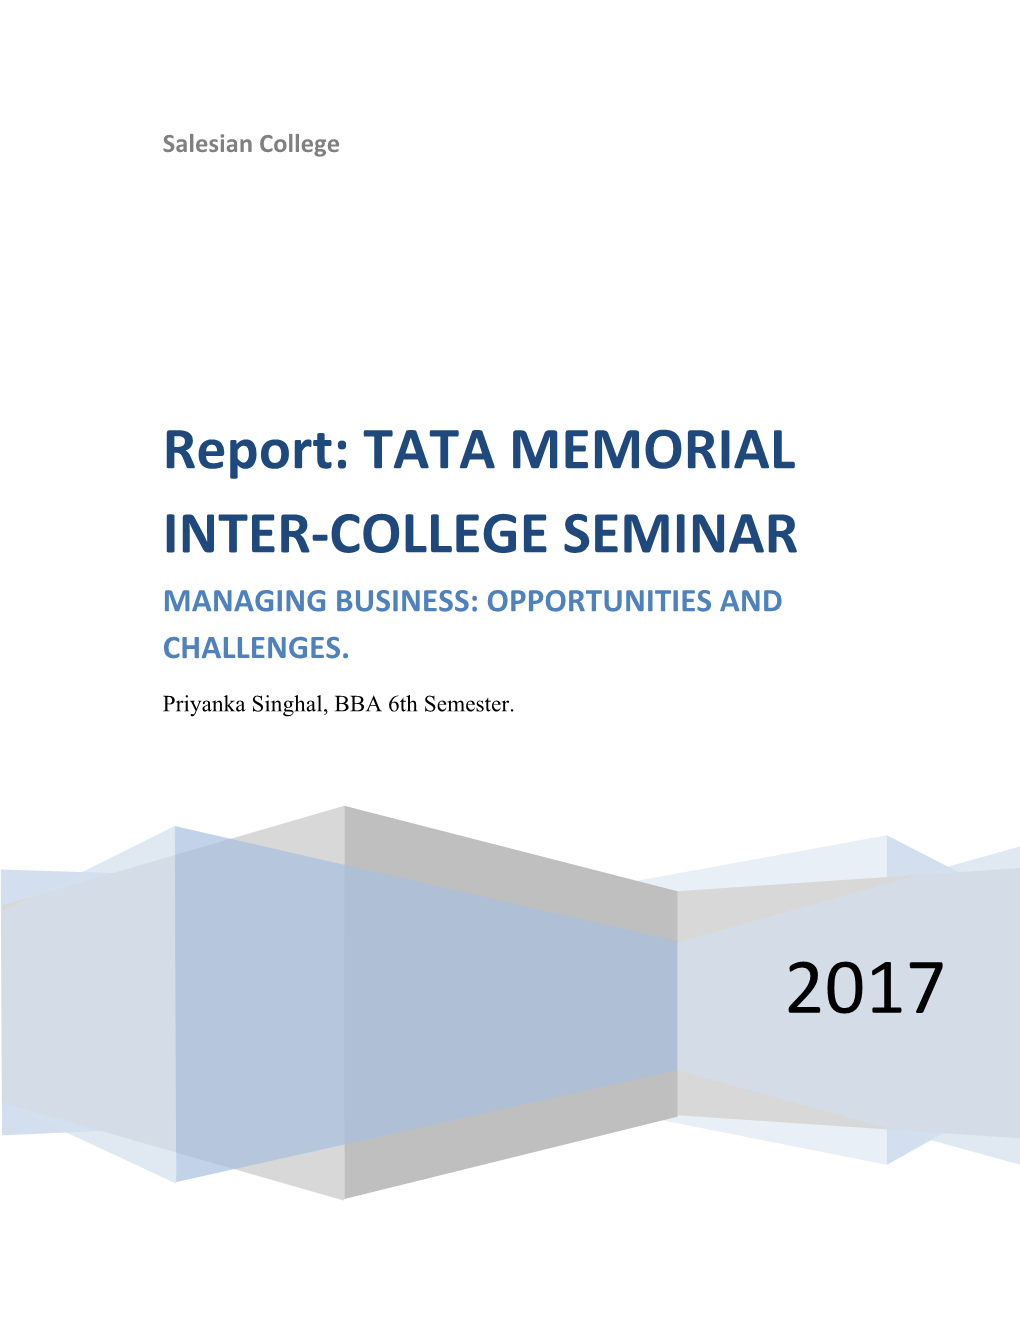 Report: TATA MEMORIAL INTER-COLLEGE SEMINAR MANAGING BUSINESS: OPPORTUNITIES and CHALLENGES